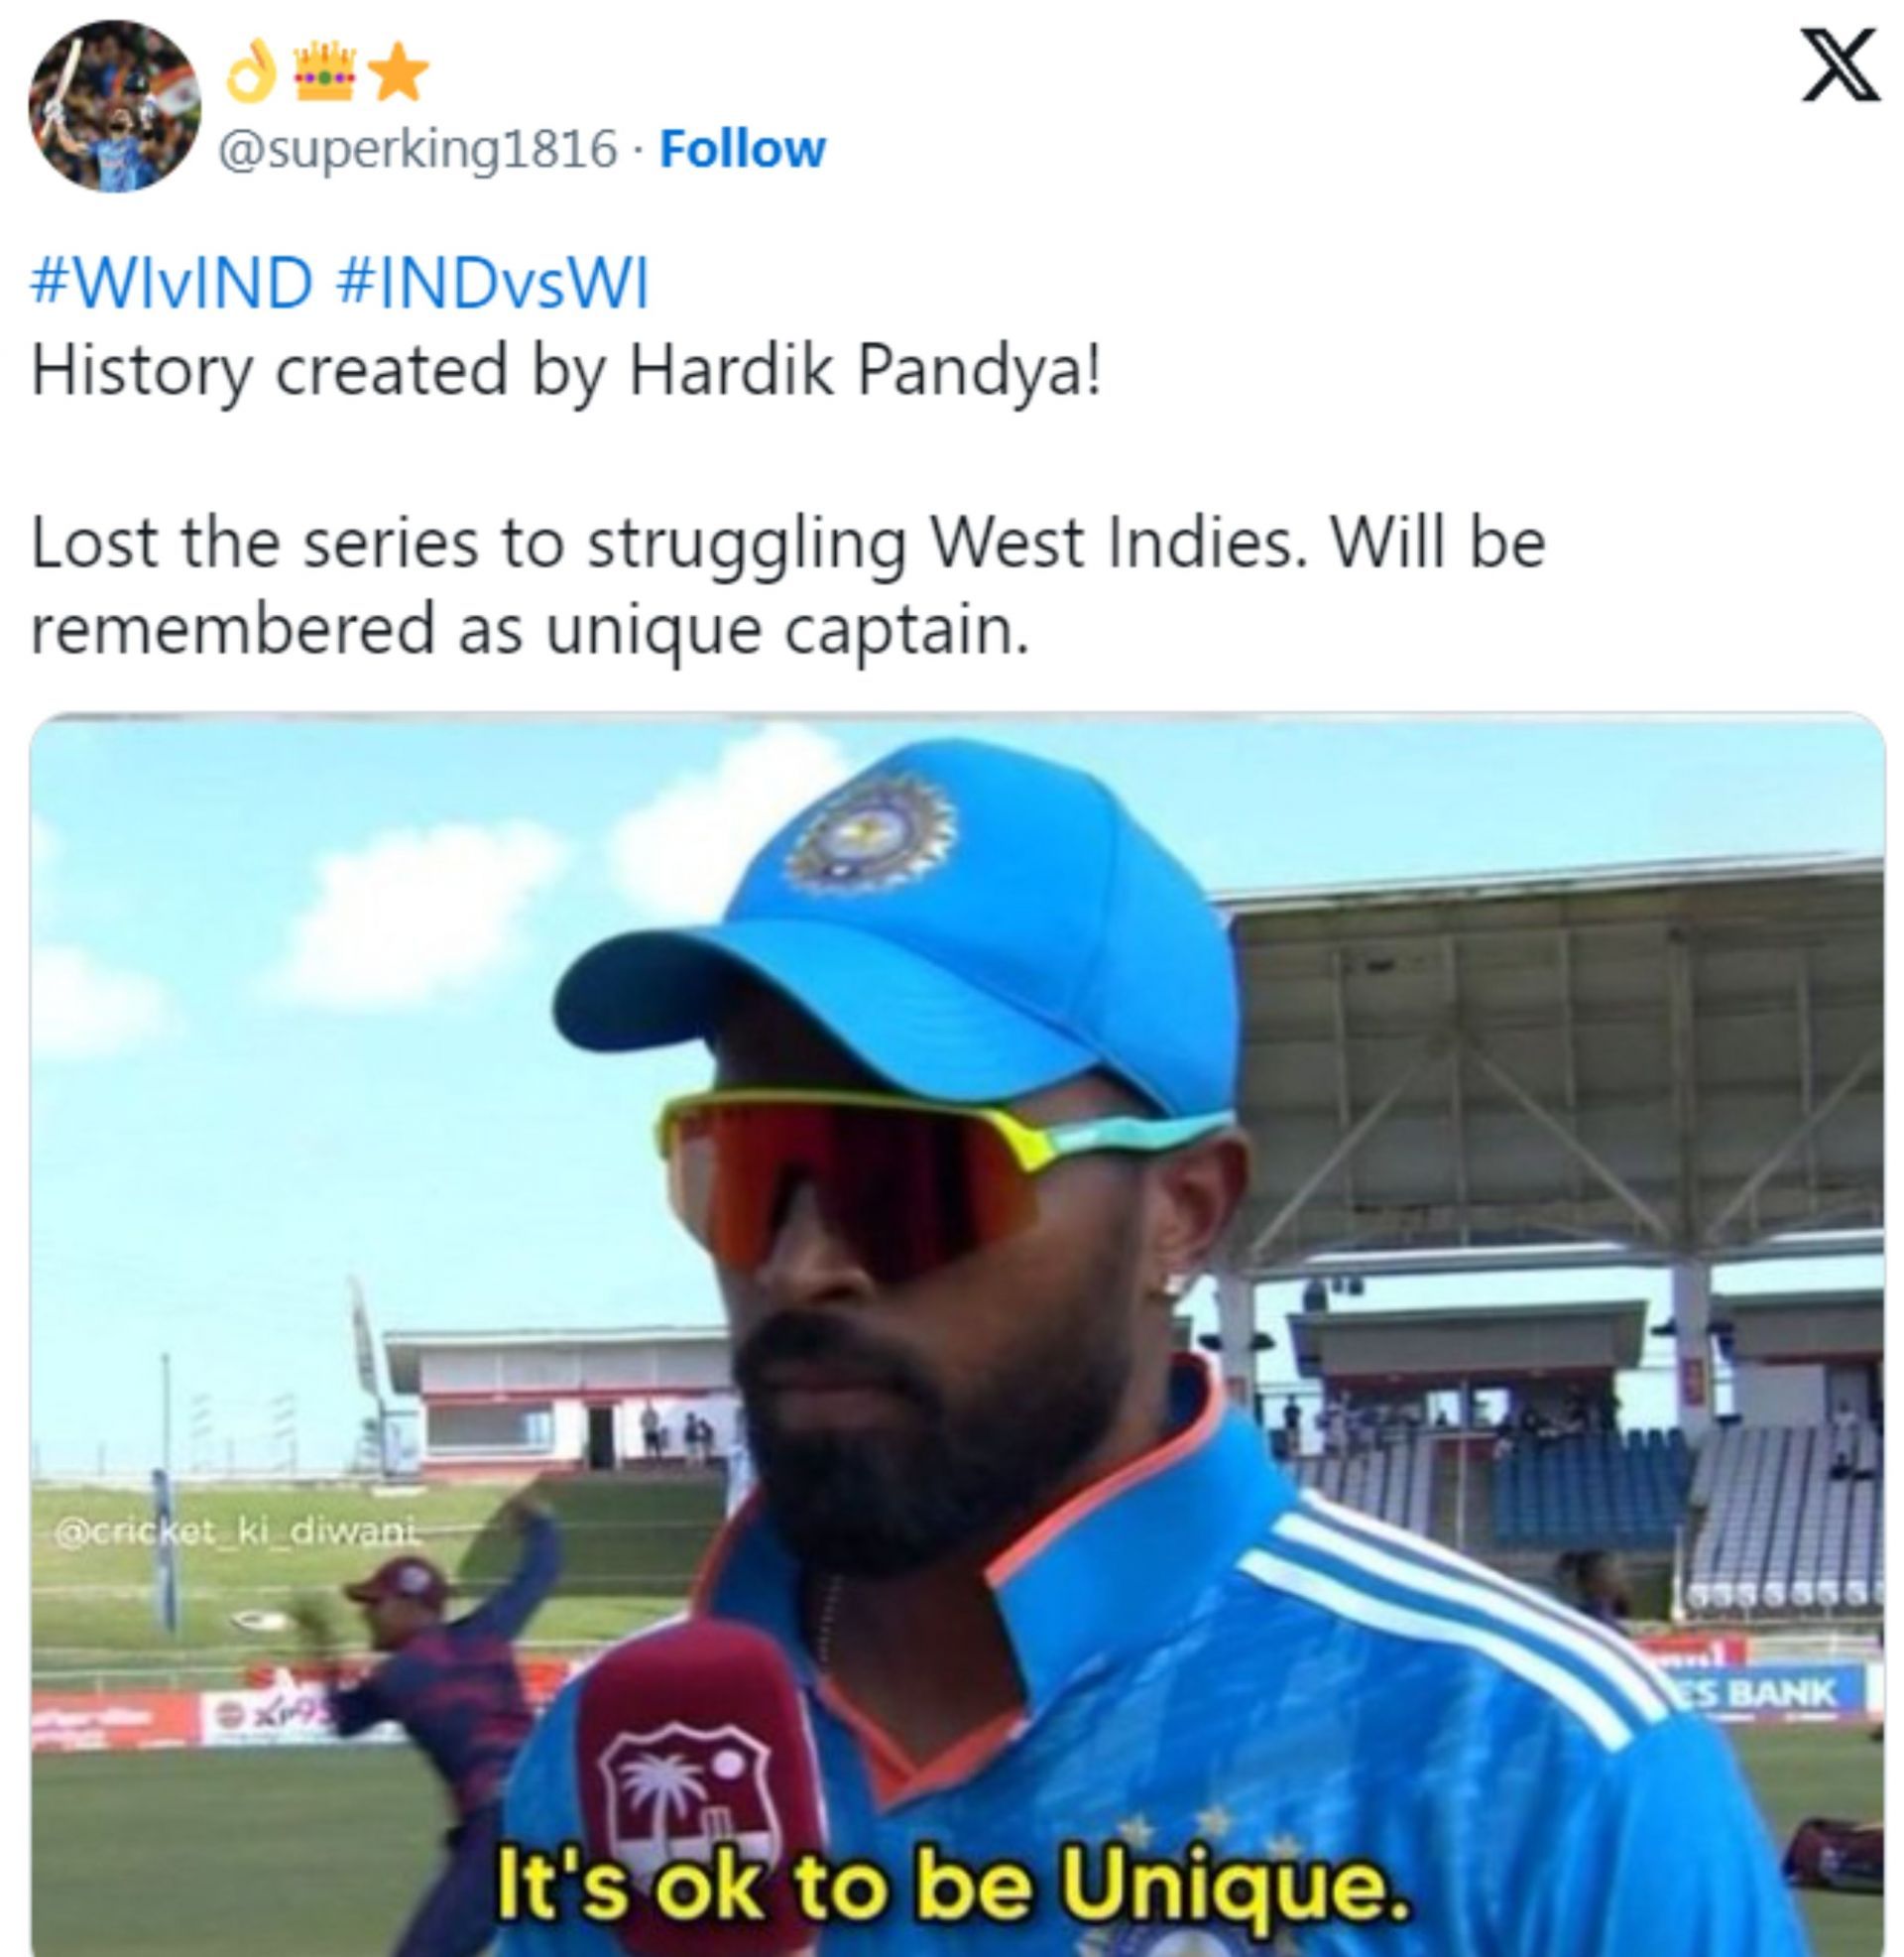 Meme shared by a fan after watching the 5th T20I India vs West Indies.